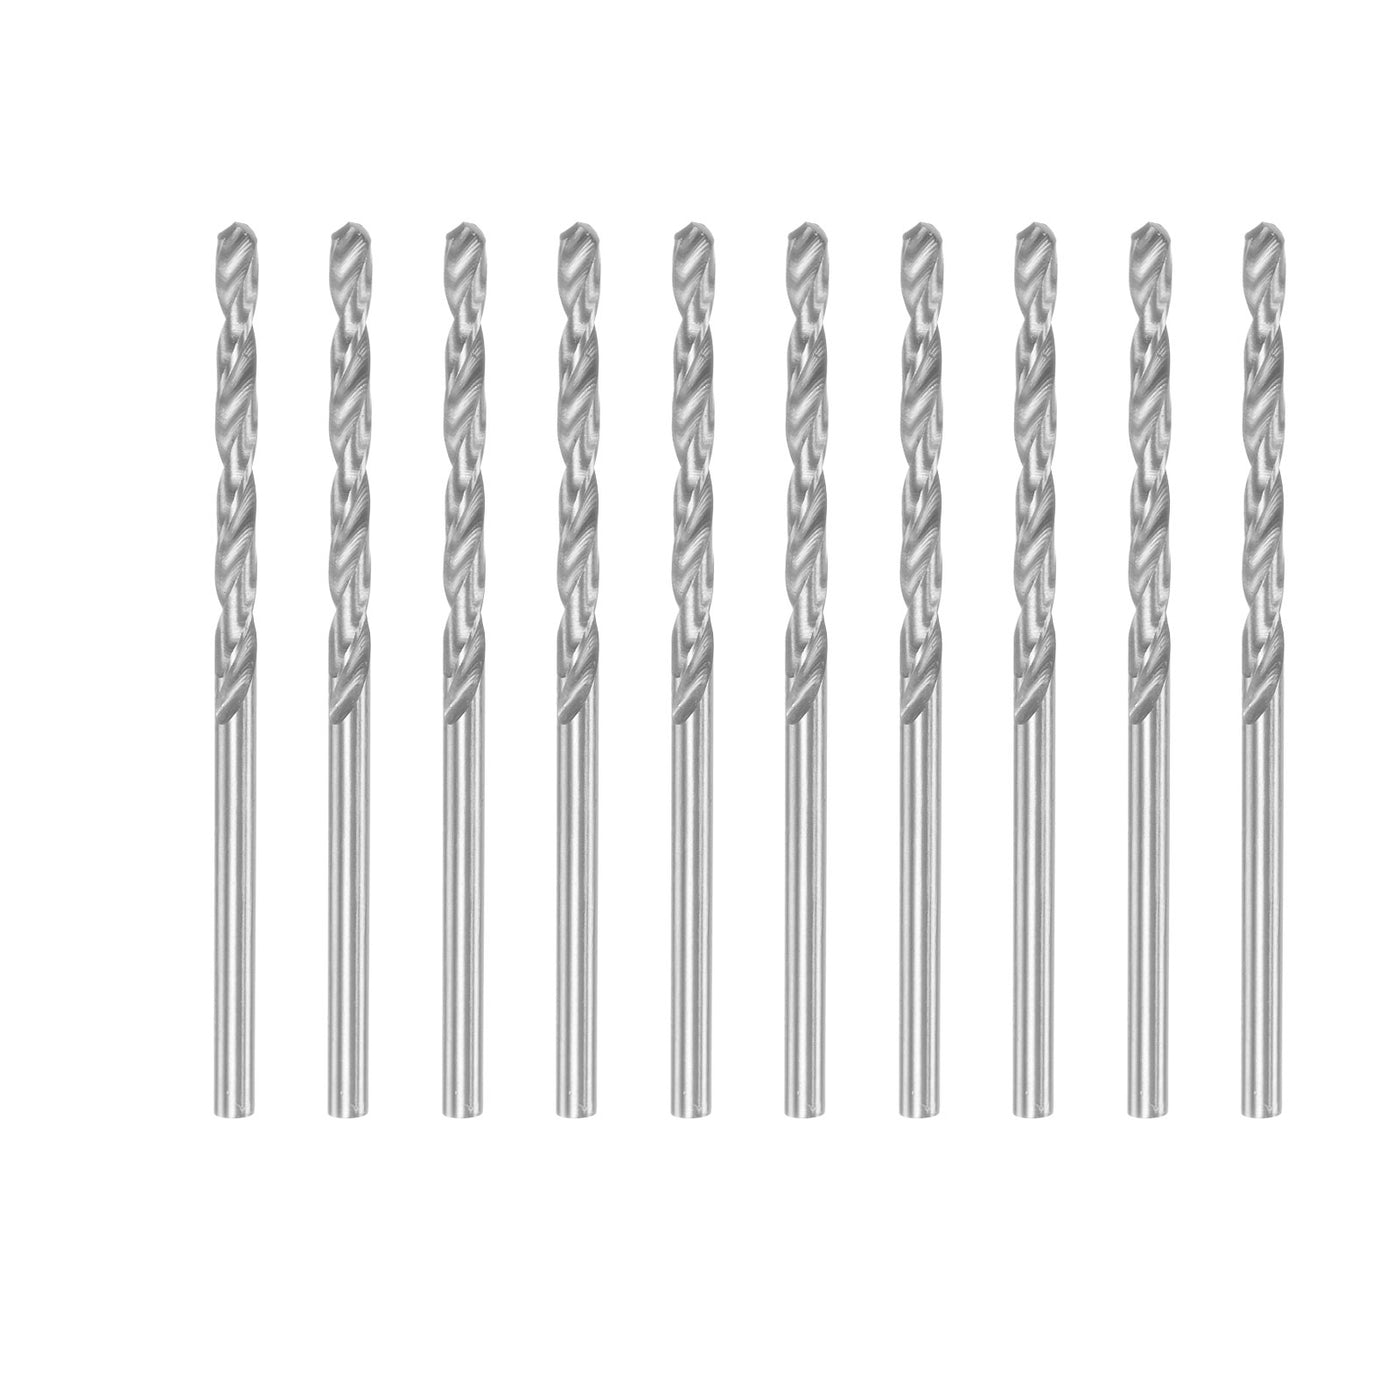 uxcell Uxcell 10 Pcs 2.6mm High Speed Steel Drill Bits, Fully Ground 57mm Length Drill Bit